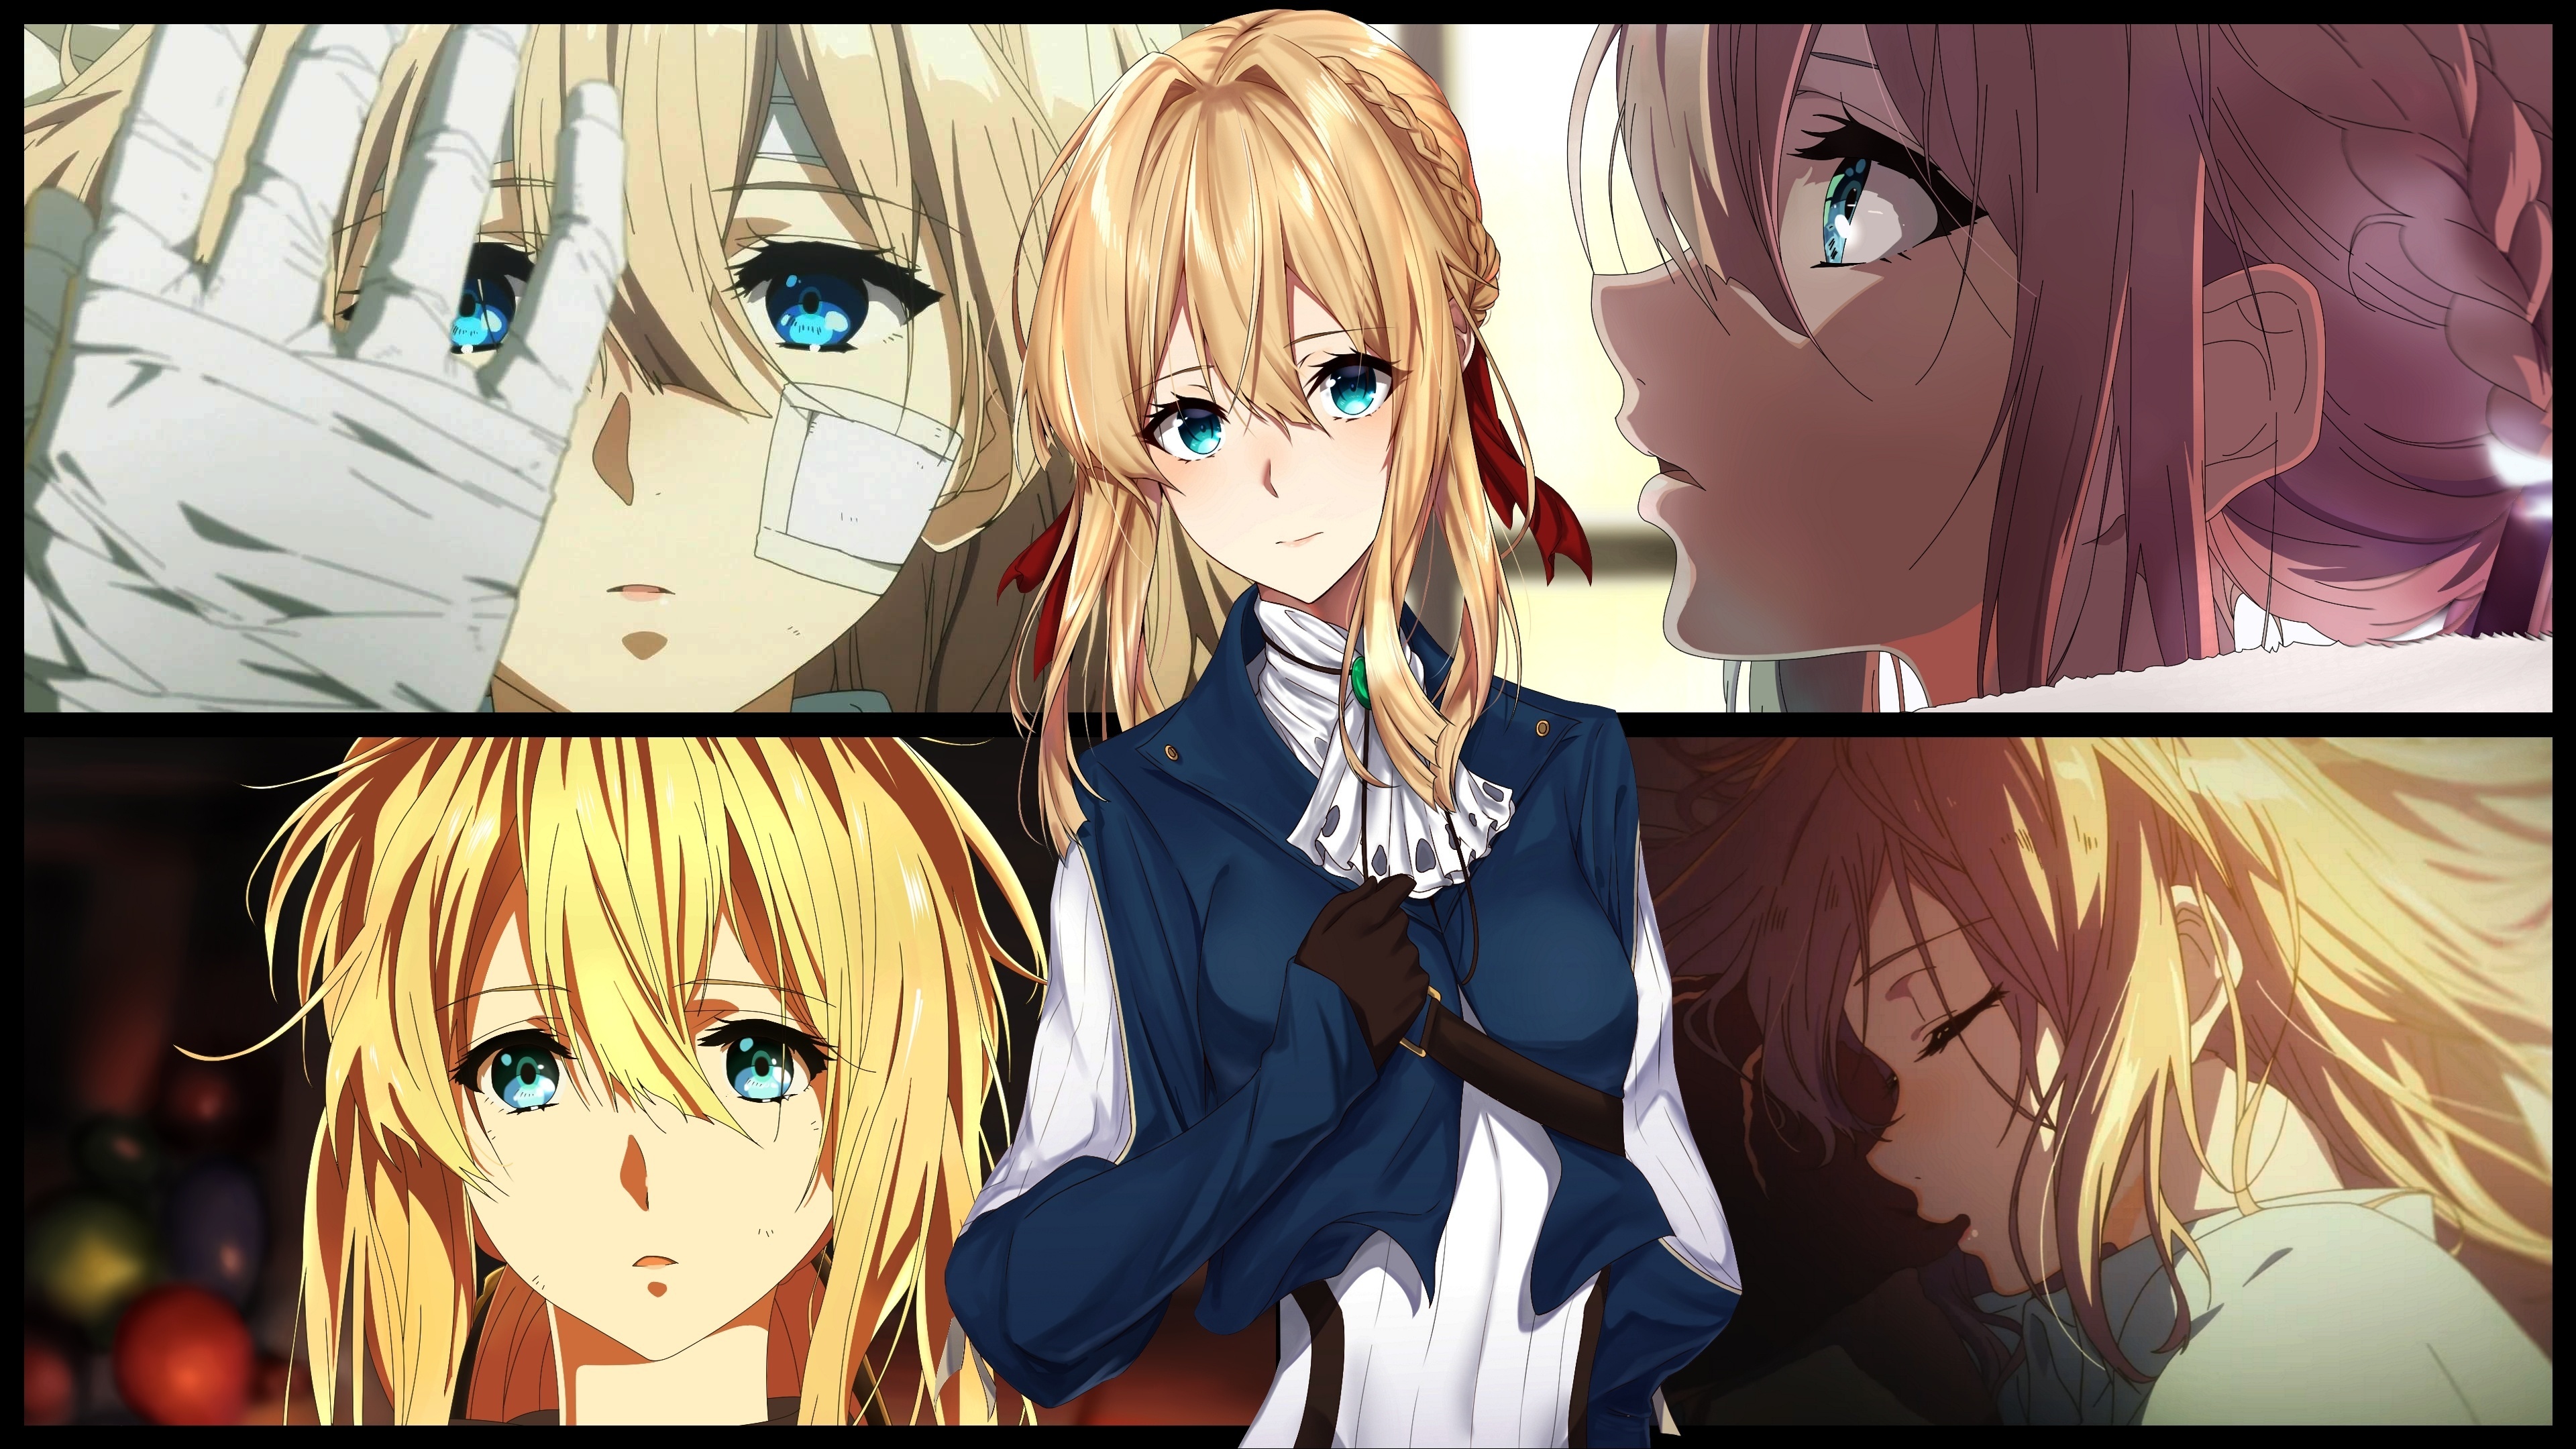 Download 3840x2400 Wallpaper Collage Anime Girl Violet